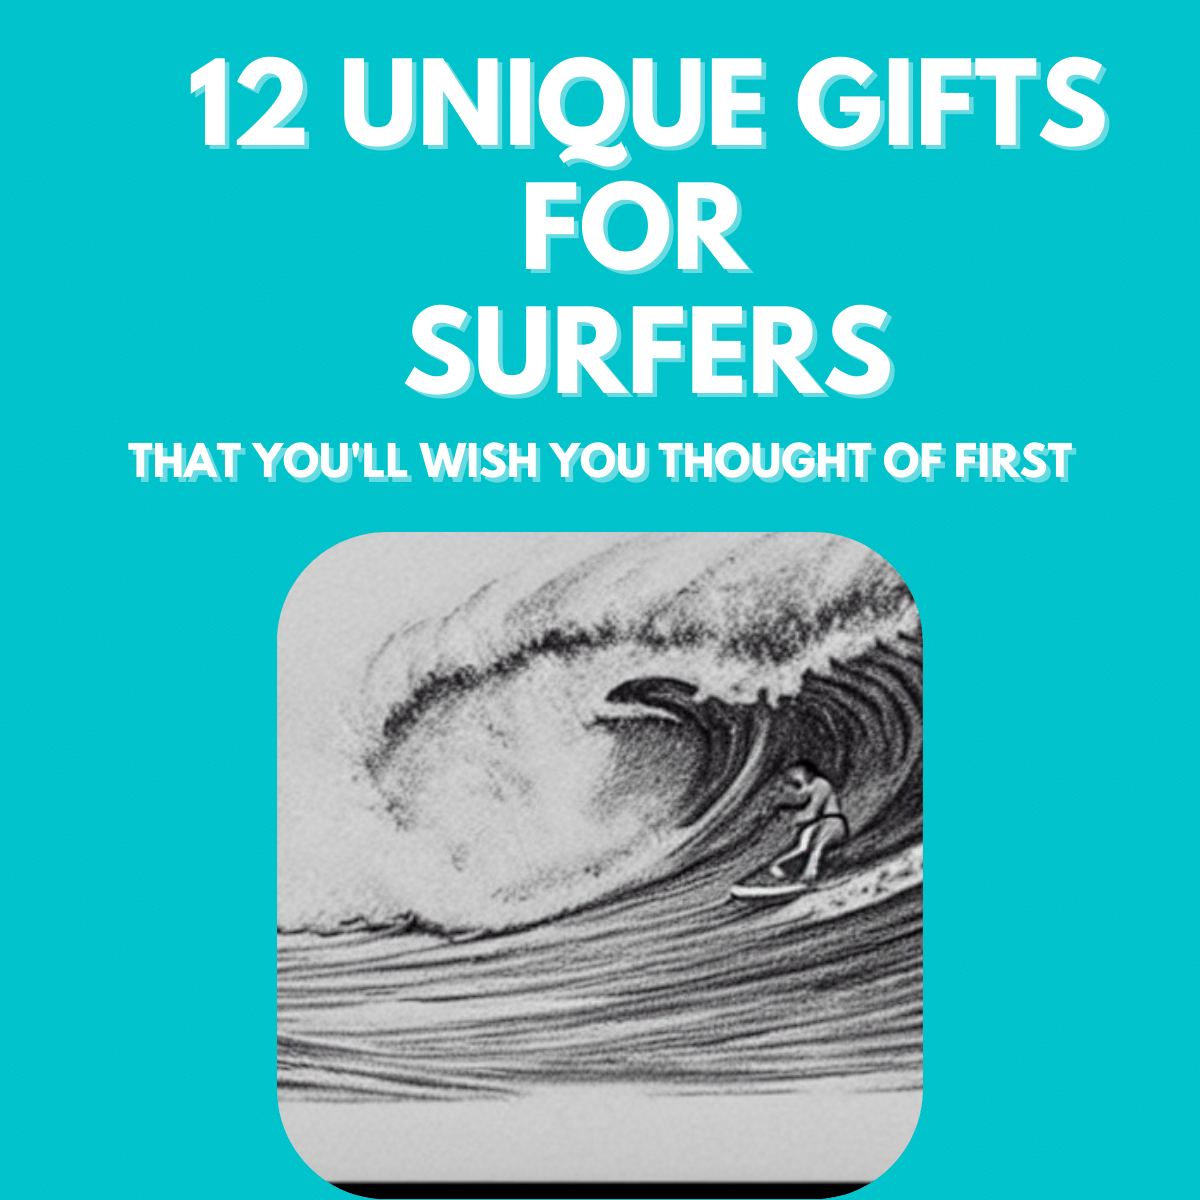 12 Unique Gifts for Surfers That You'll Wish You Thought Of First